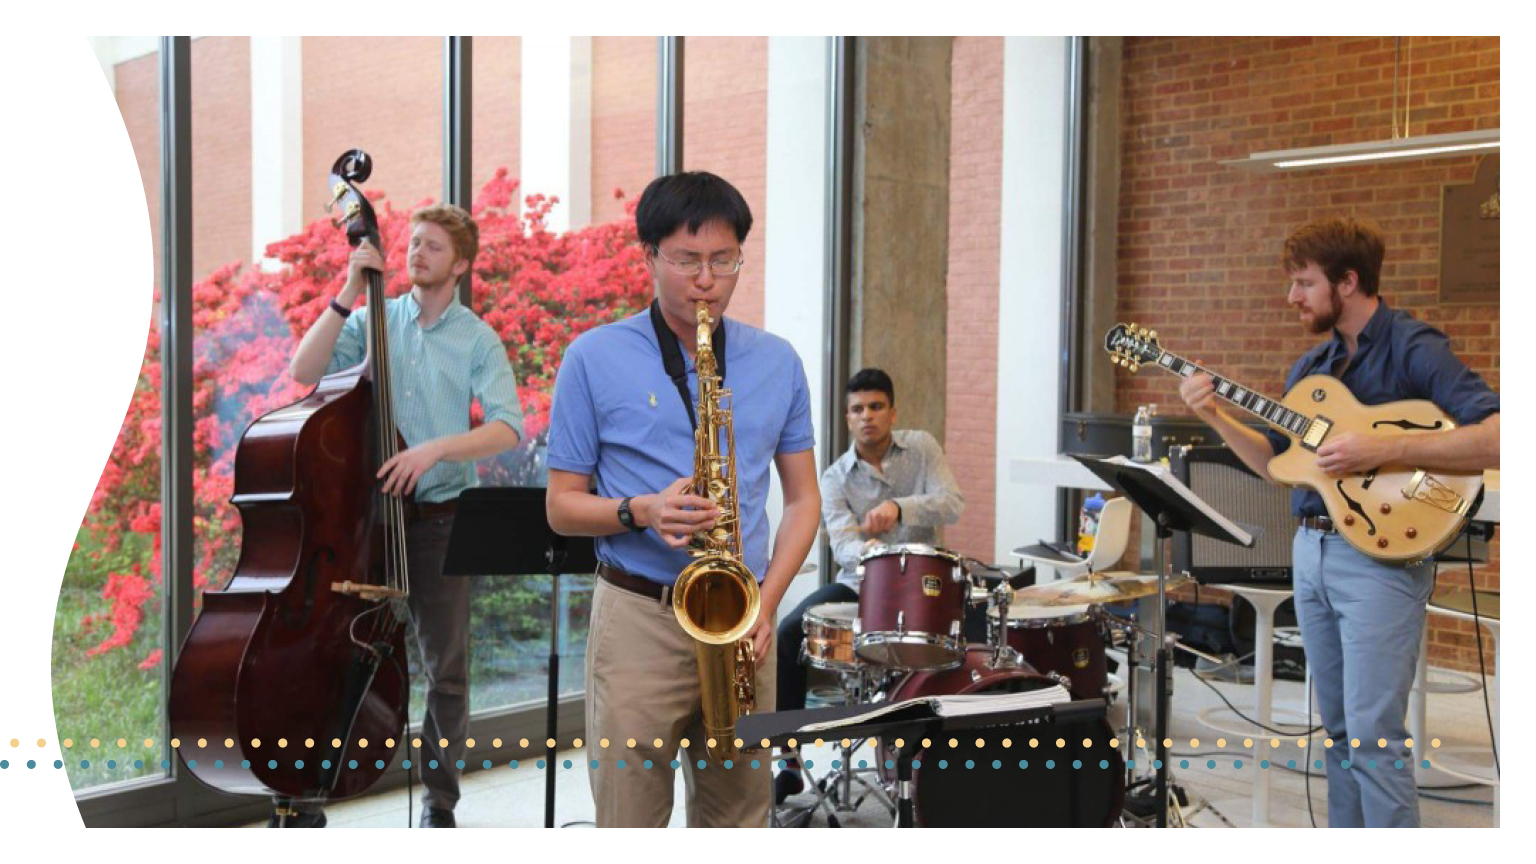 A few studnets playing jazz in a Georgia Tech campus building.